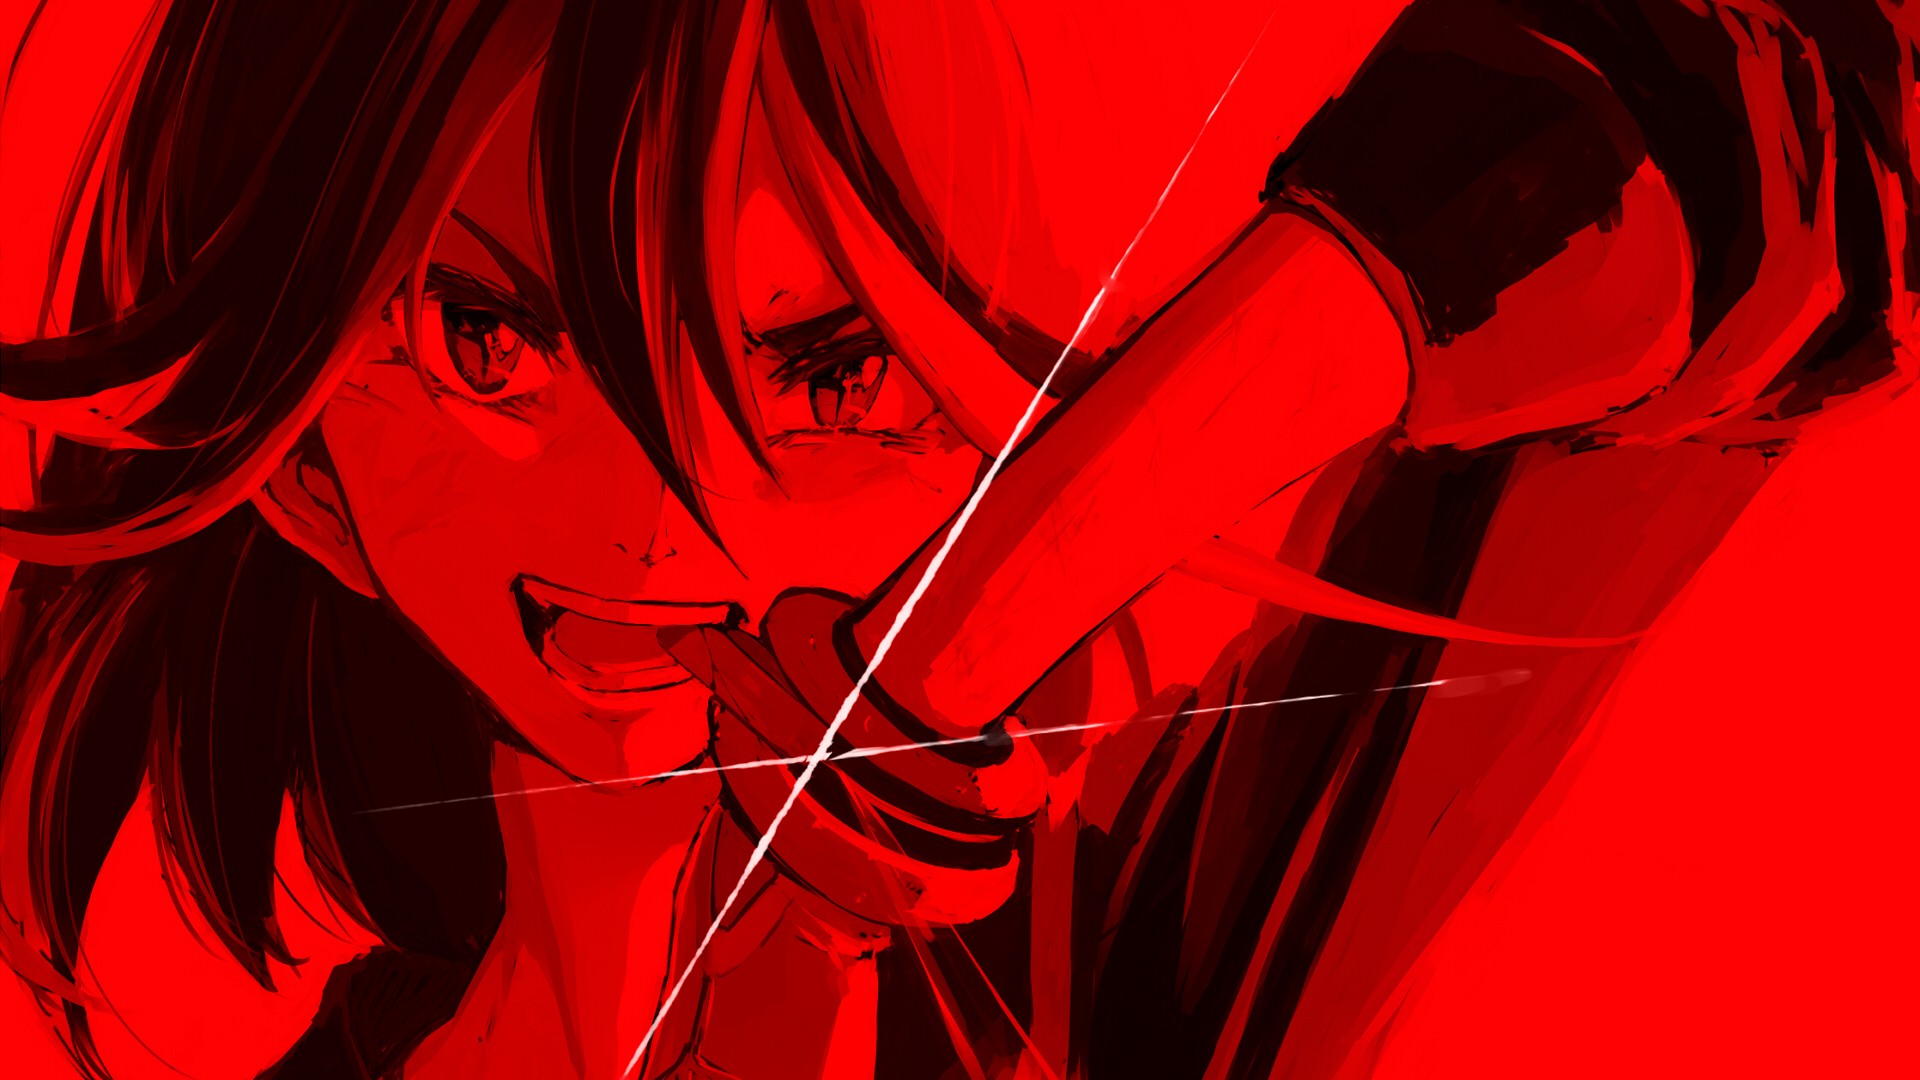 women, angry, hair in face, open mouth, face, anime, Kill la Kill, Matoi  Ryuuko, red background, anime girls, closeup